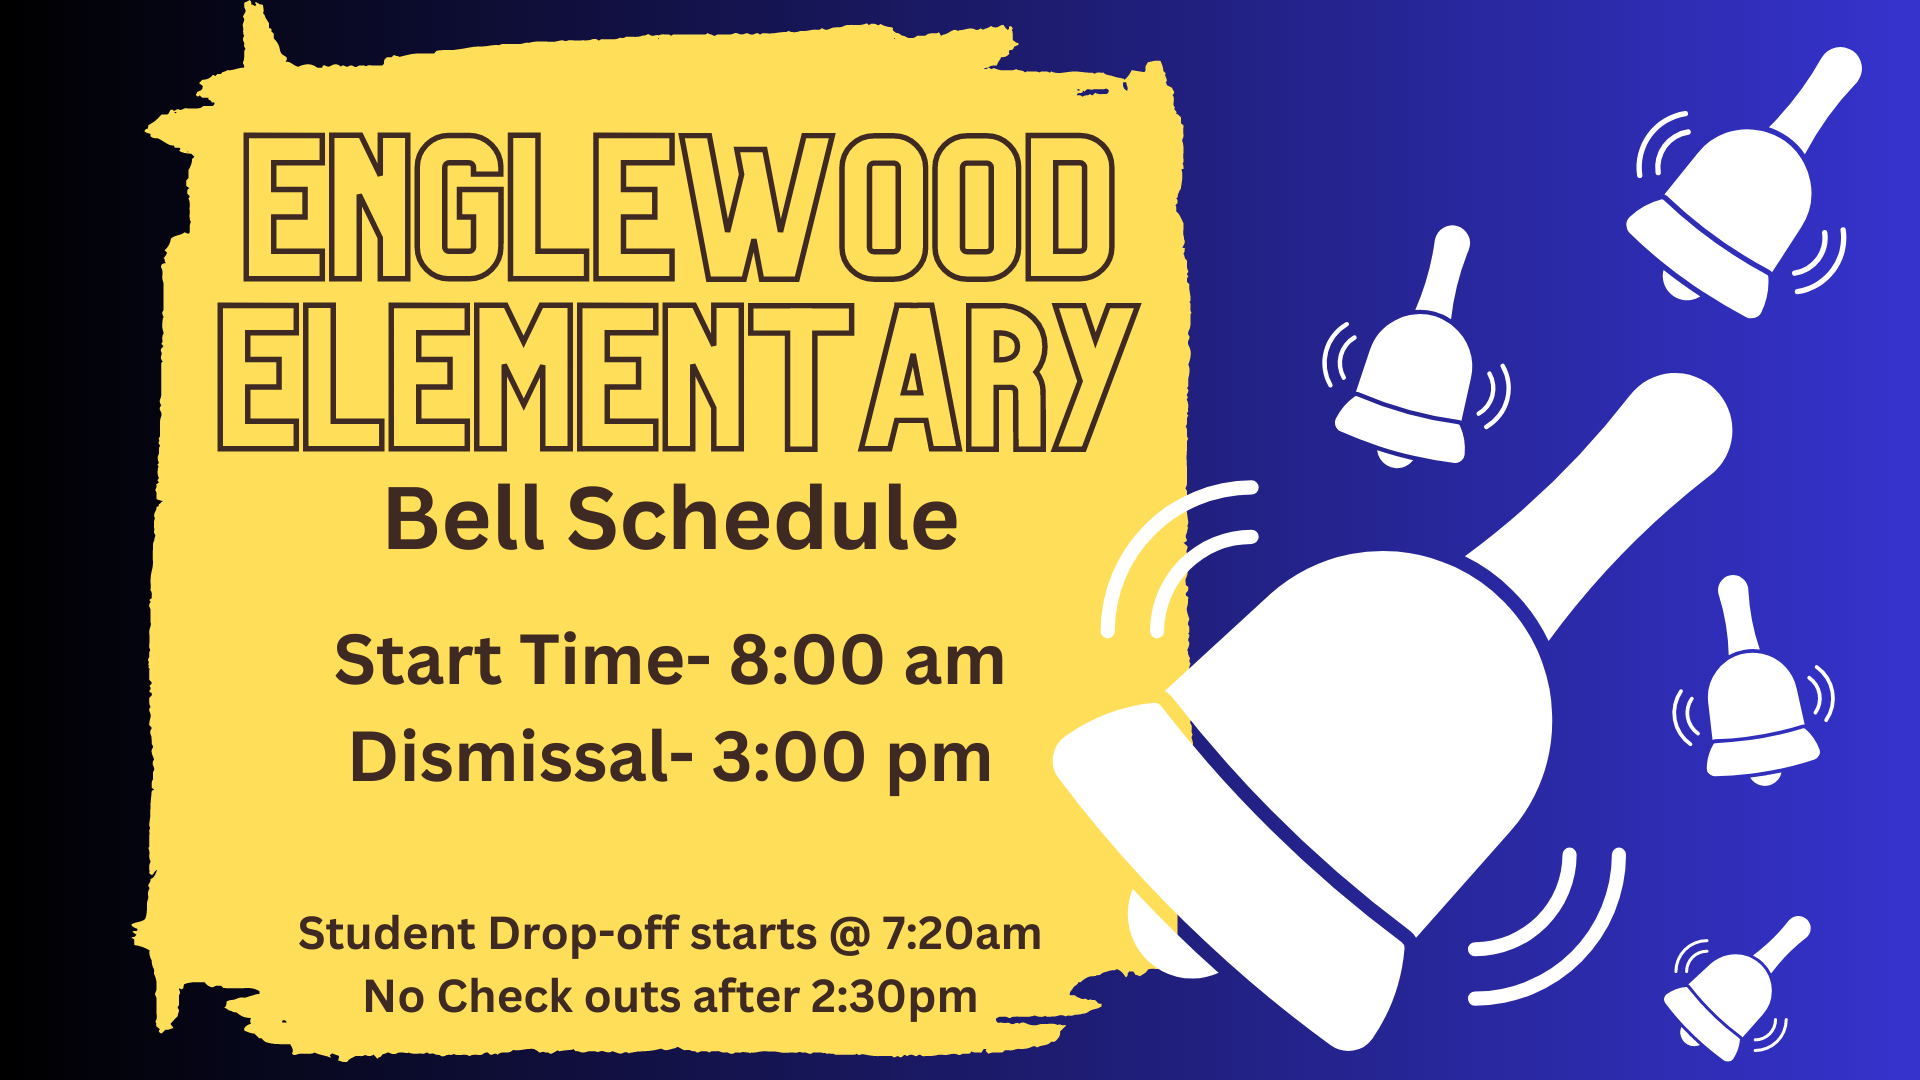 englewood elementary school bell schedule. start time 8AM. Dismissal time 3PM. Drop off time starts at 7:20 AM